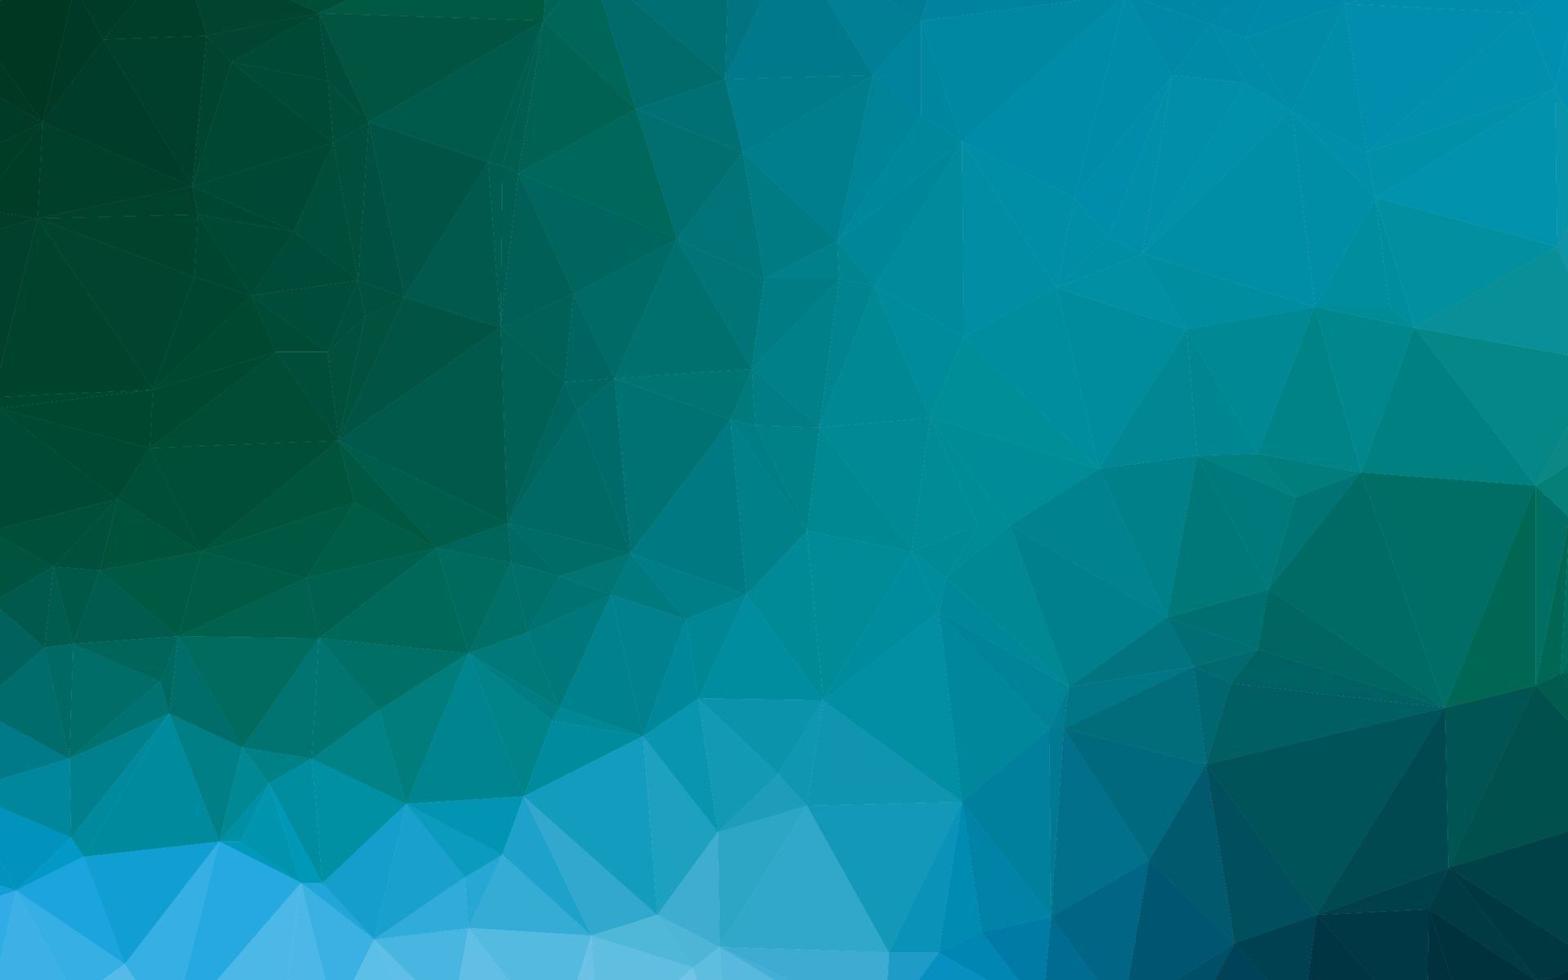 Light Blue, Green vector polygon abstract background.